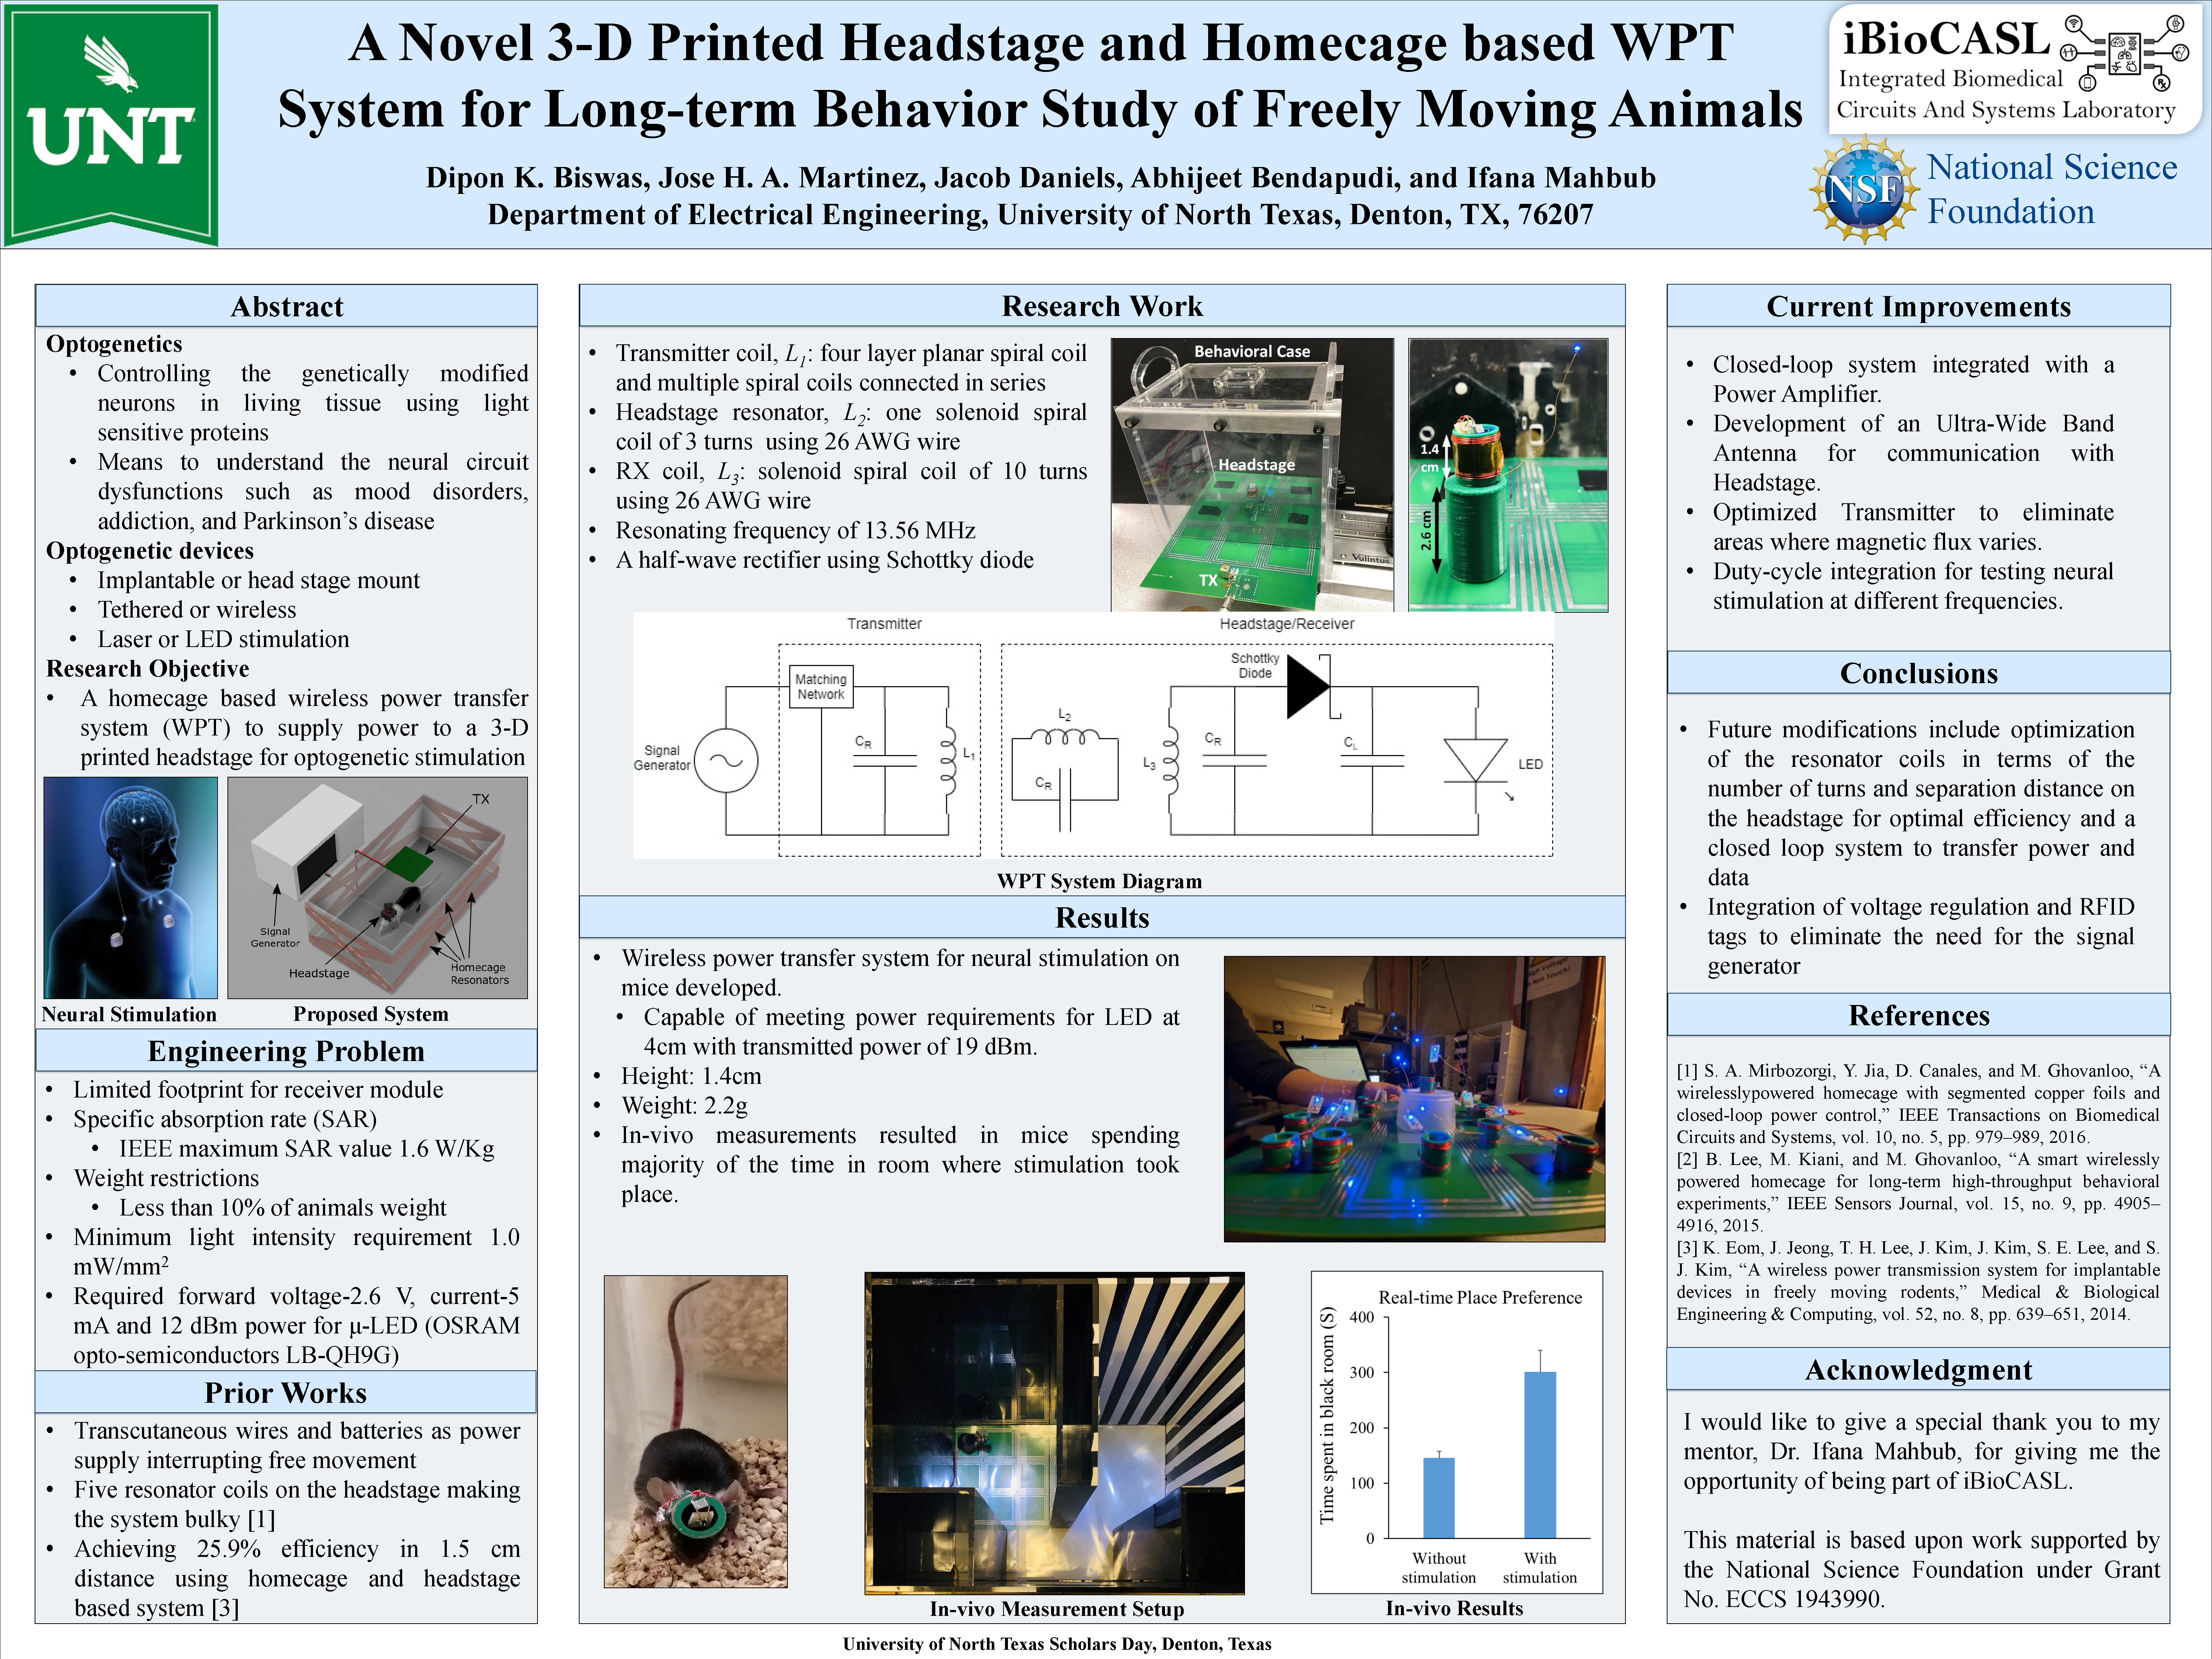 A Novel 3-D Printed Headstage and Homecage based WPT System for Long-term Behavior Study of Freely M